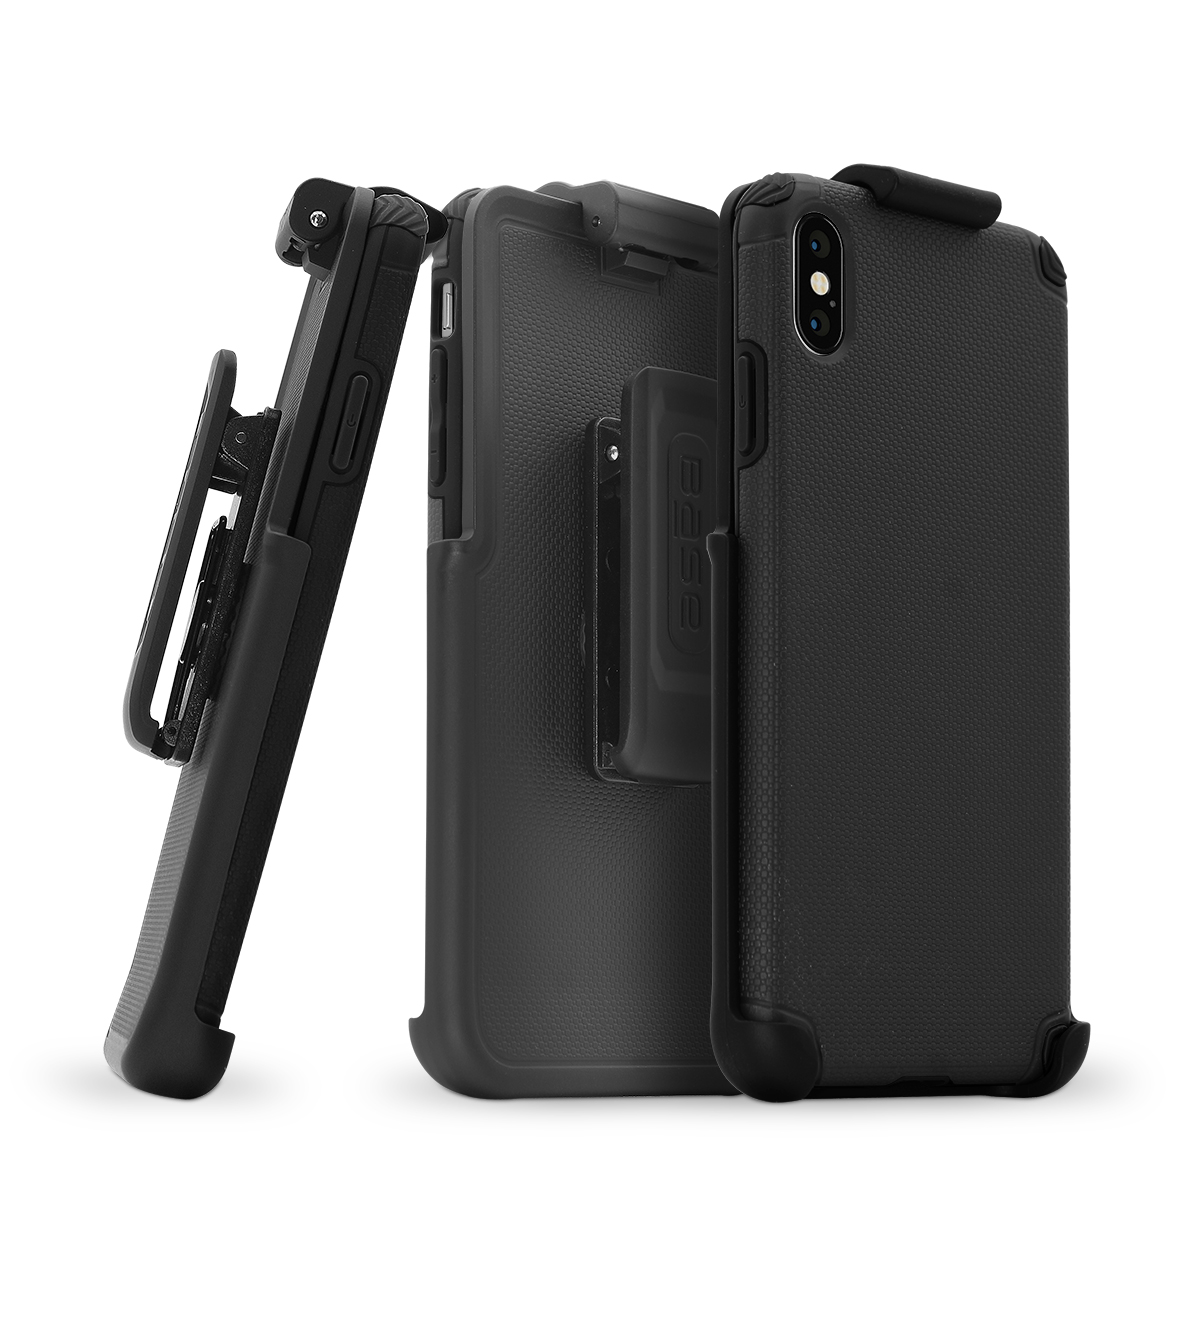 Base Protech Case with Holster for iPhone XS Max